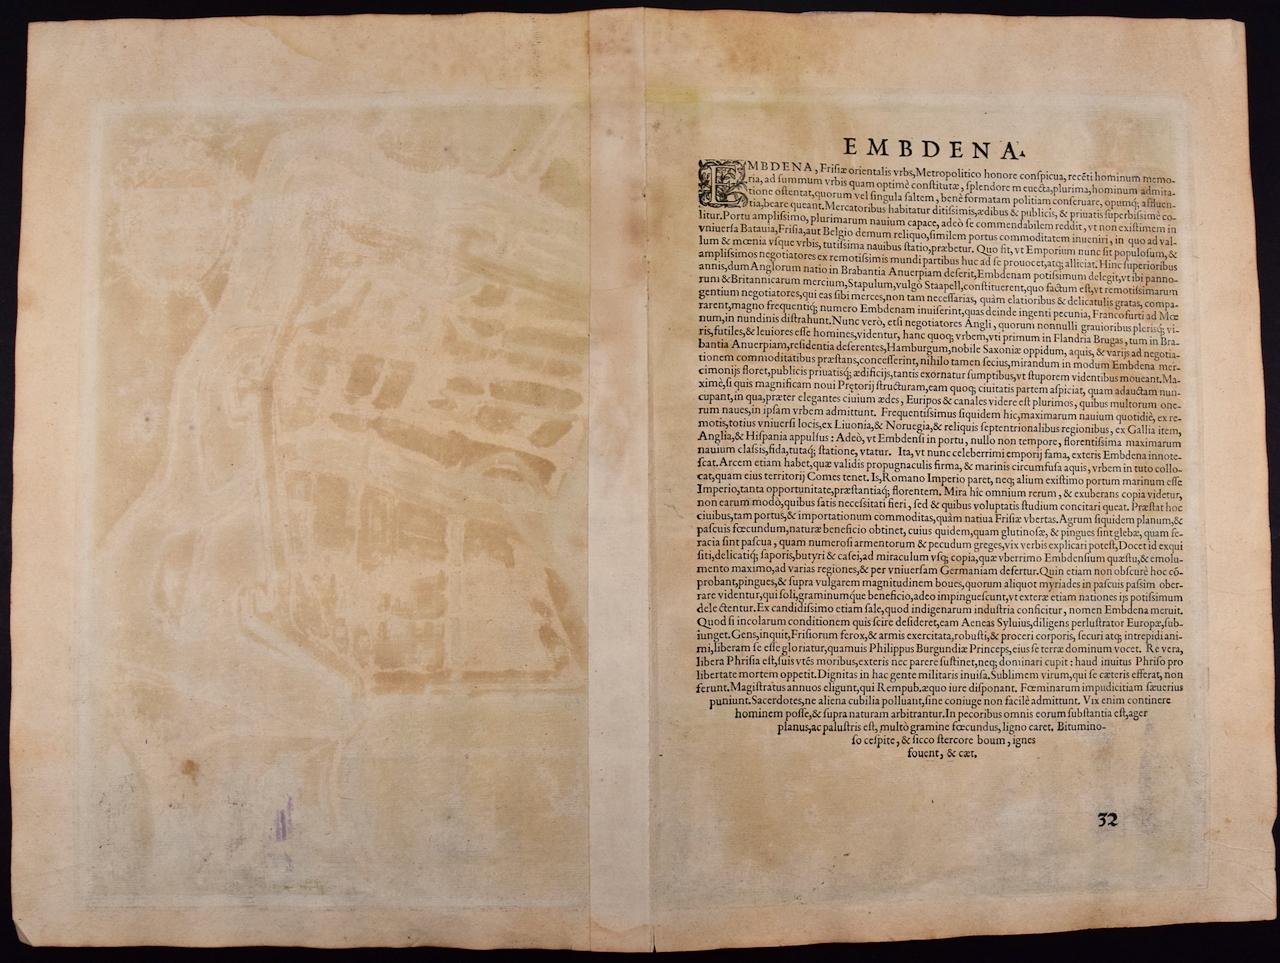  View of Emden, Germany: A 16th Century Hand-colored Map by Braun & Hogenberg - Brown Landscape Print by Frans Hogenberg